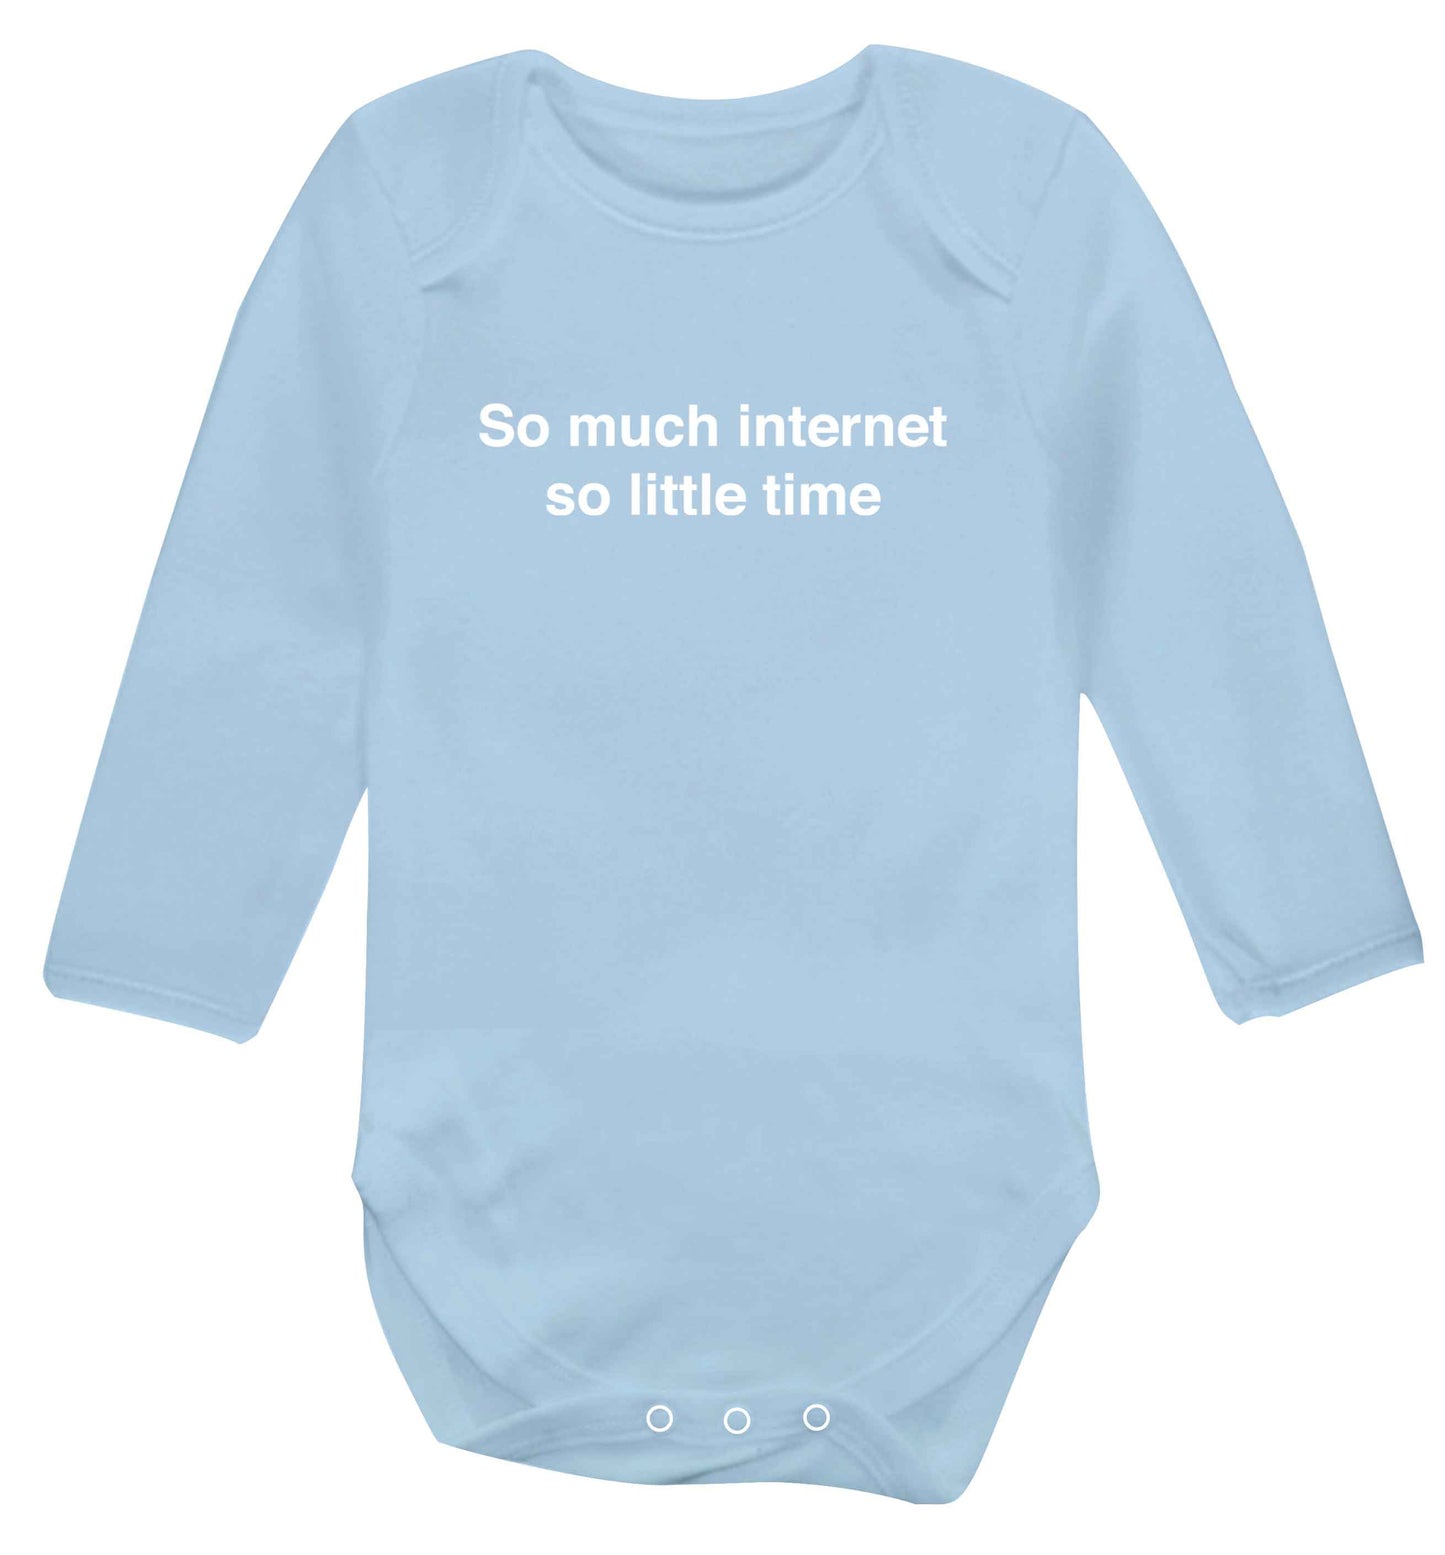 So much internet so little time baby vest long sleeved pale blue 6-12 months